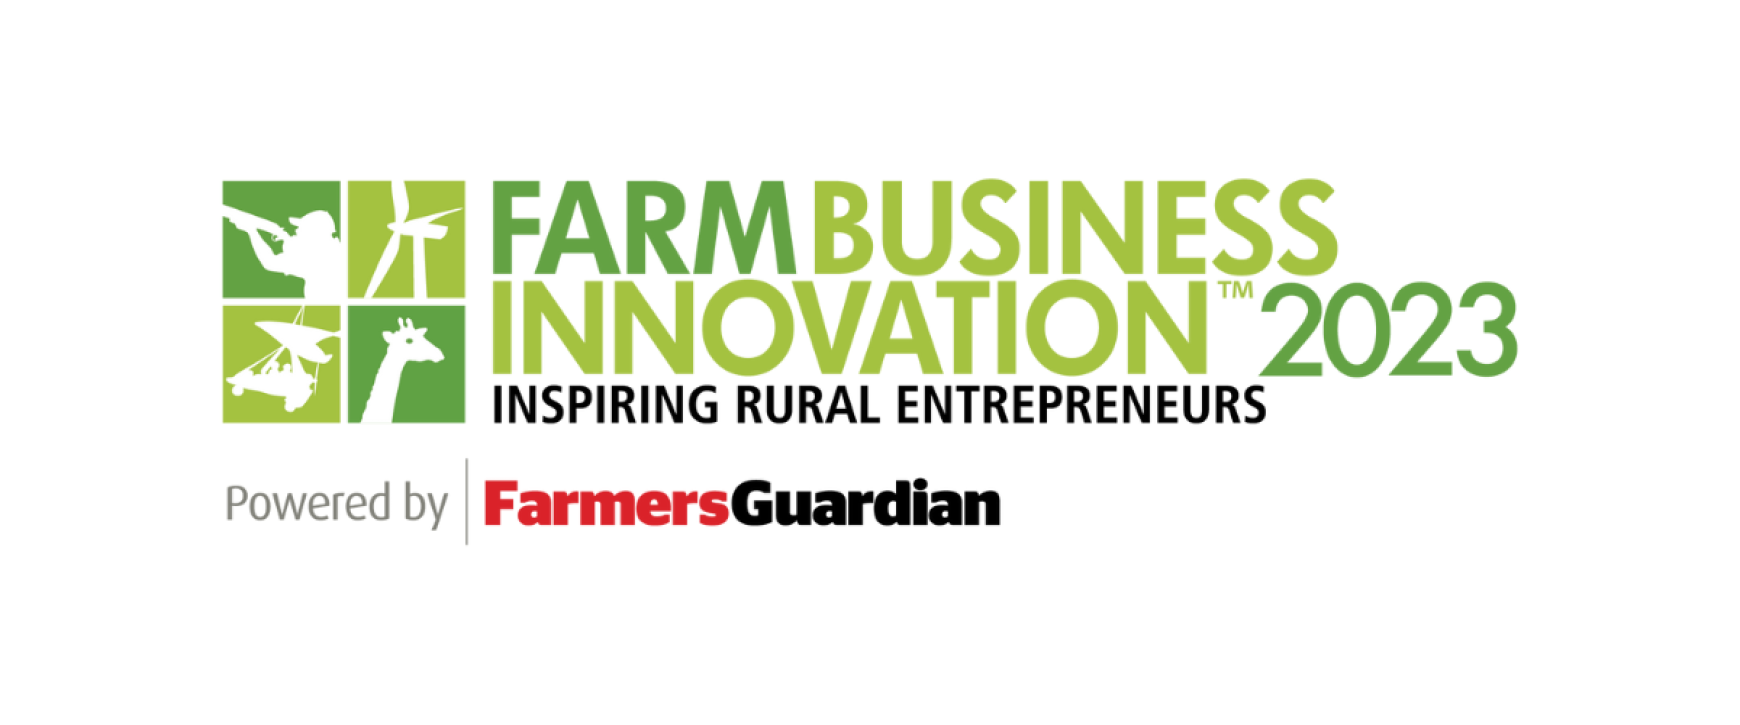 Empower Your Farm Business with NFU Energy: Join Us at the Farm Business Innovation Show 2023!